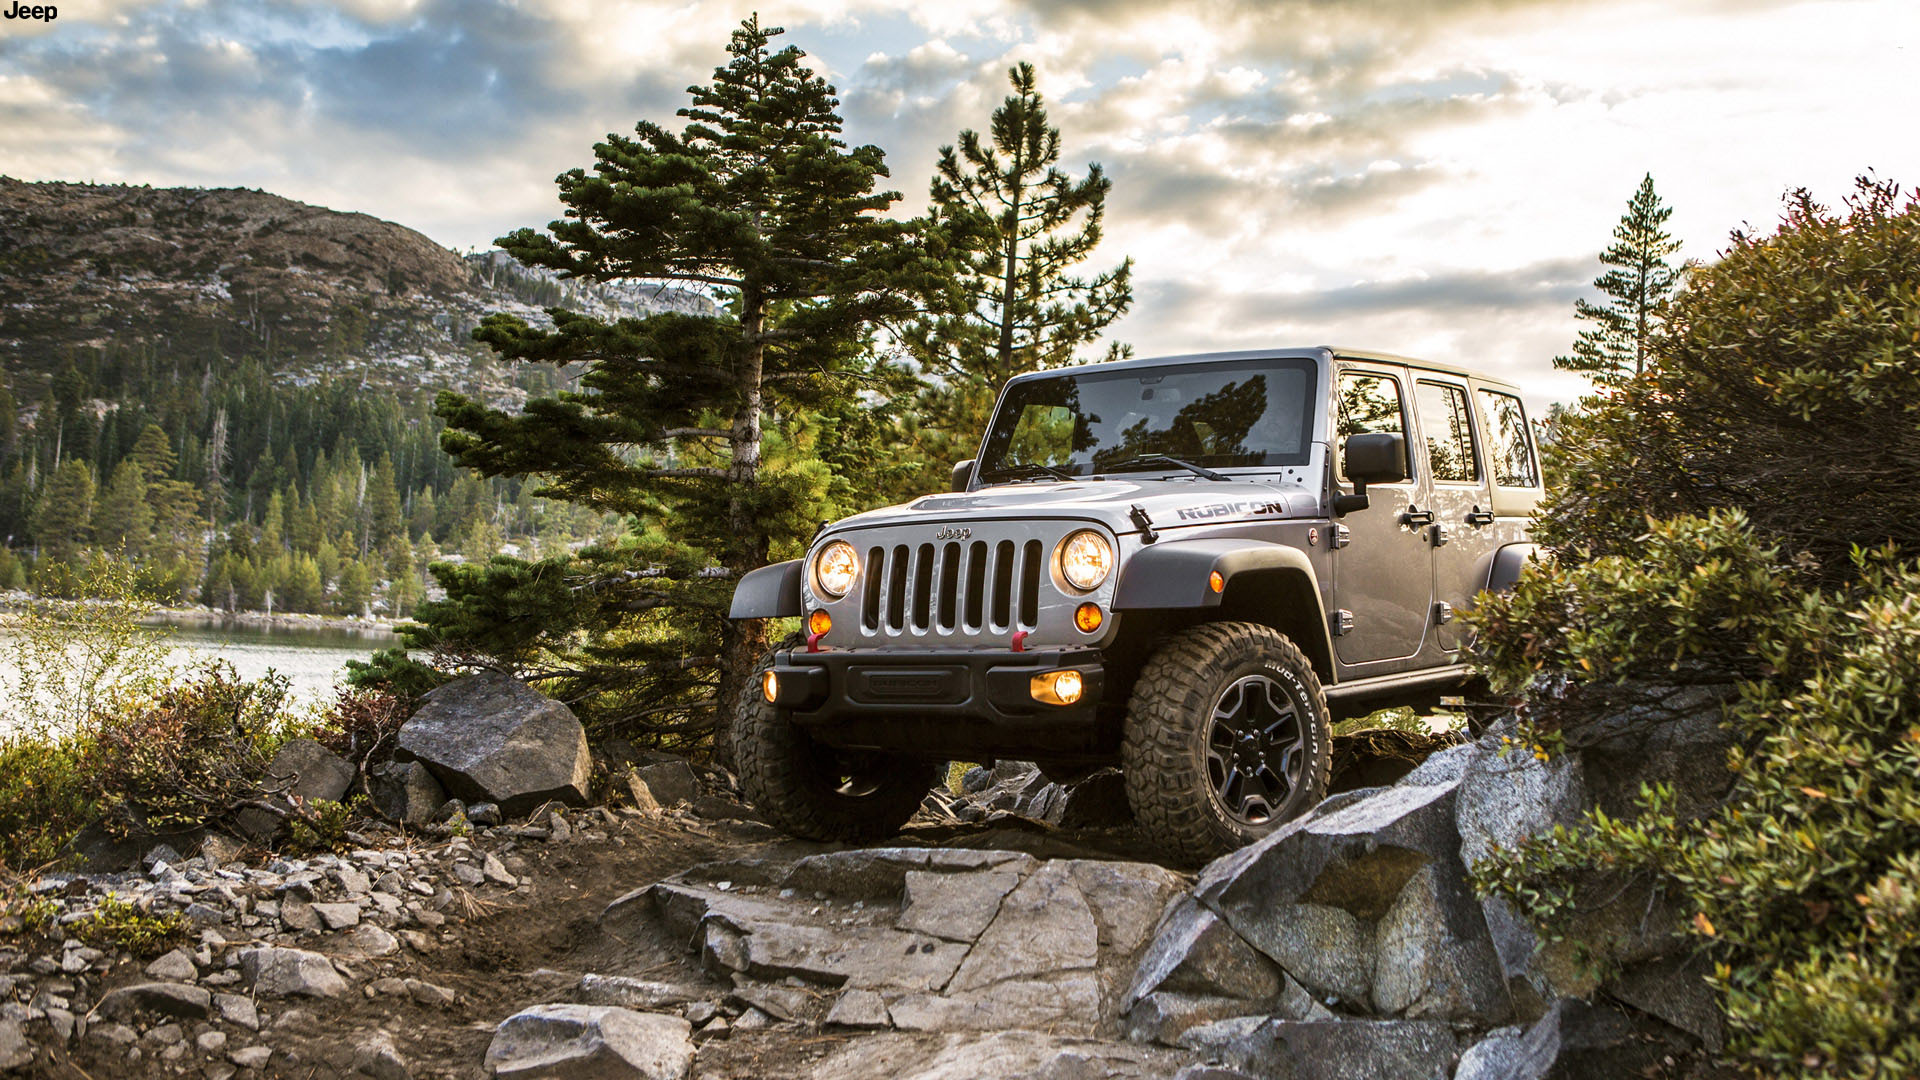 Jeep Hd Wallpapers With Resolutions 19201080 Pixel